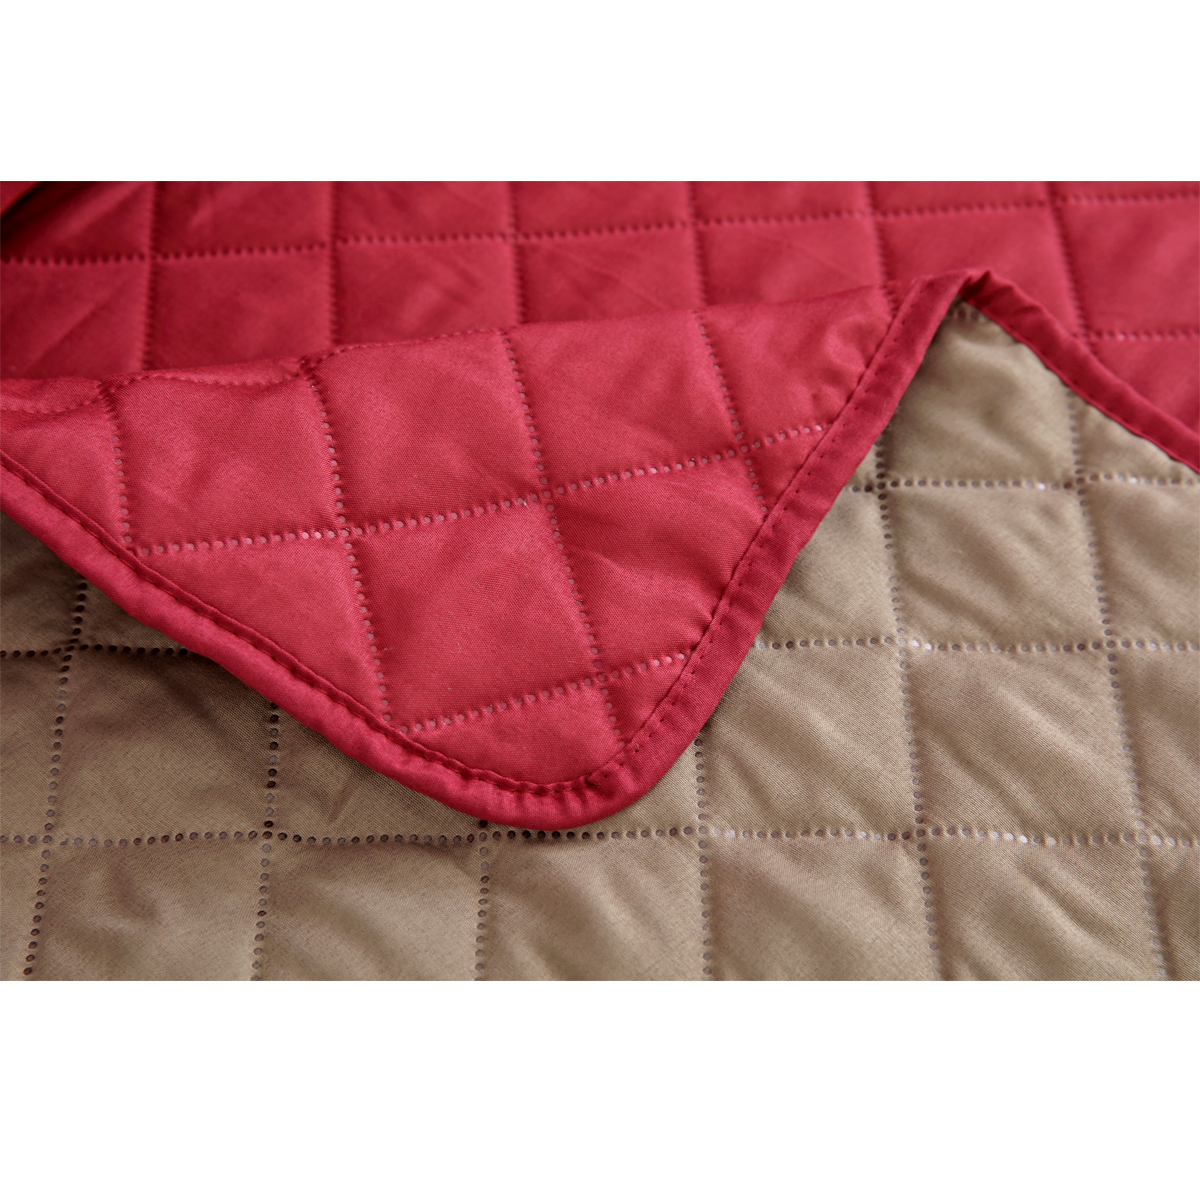 Waterproof-Seat-Printing-Pet-Sofa-Mat-Couch-Protective-Covers-Removable-With-Strap-1468136-10